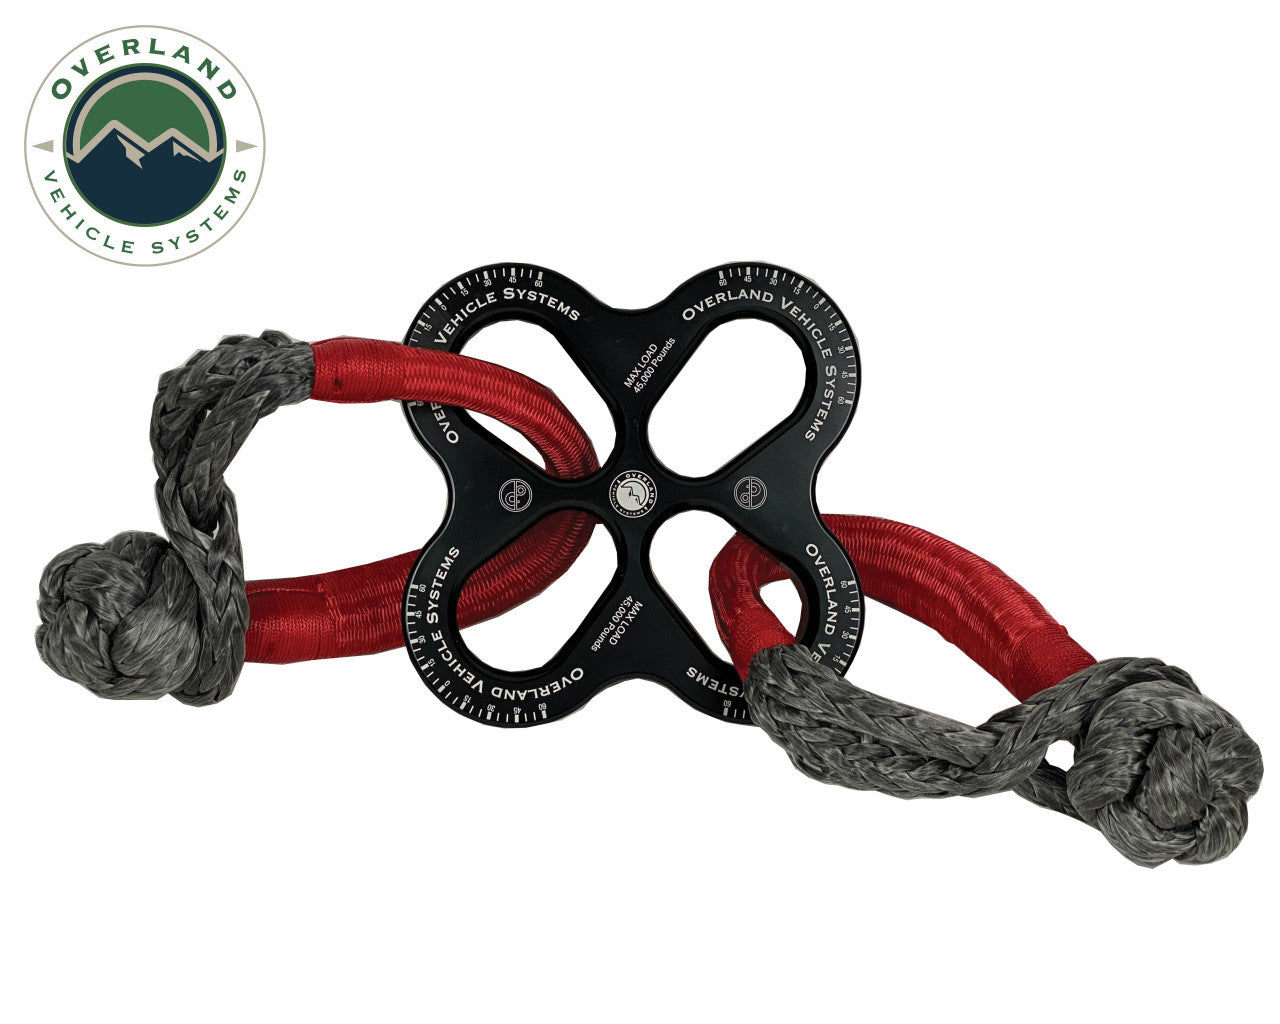 OVS R.D.L. 8" Recovery Distribution Link 45,000 Lb. Black And (2) 5/8" Soft Shackles